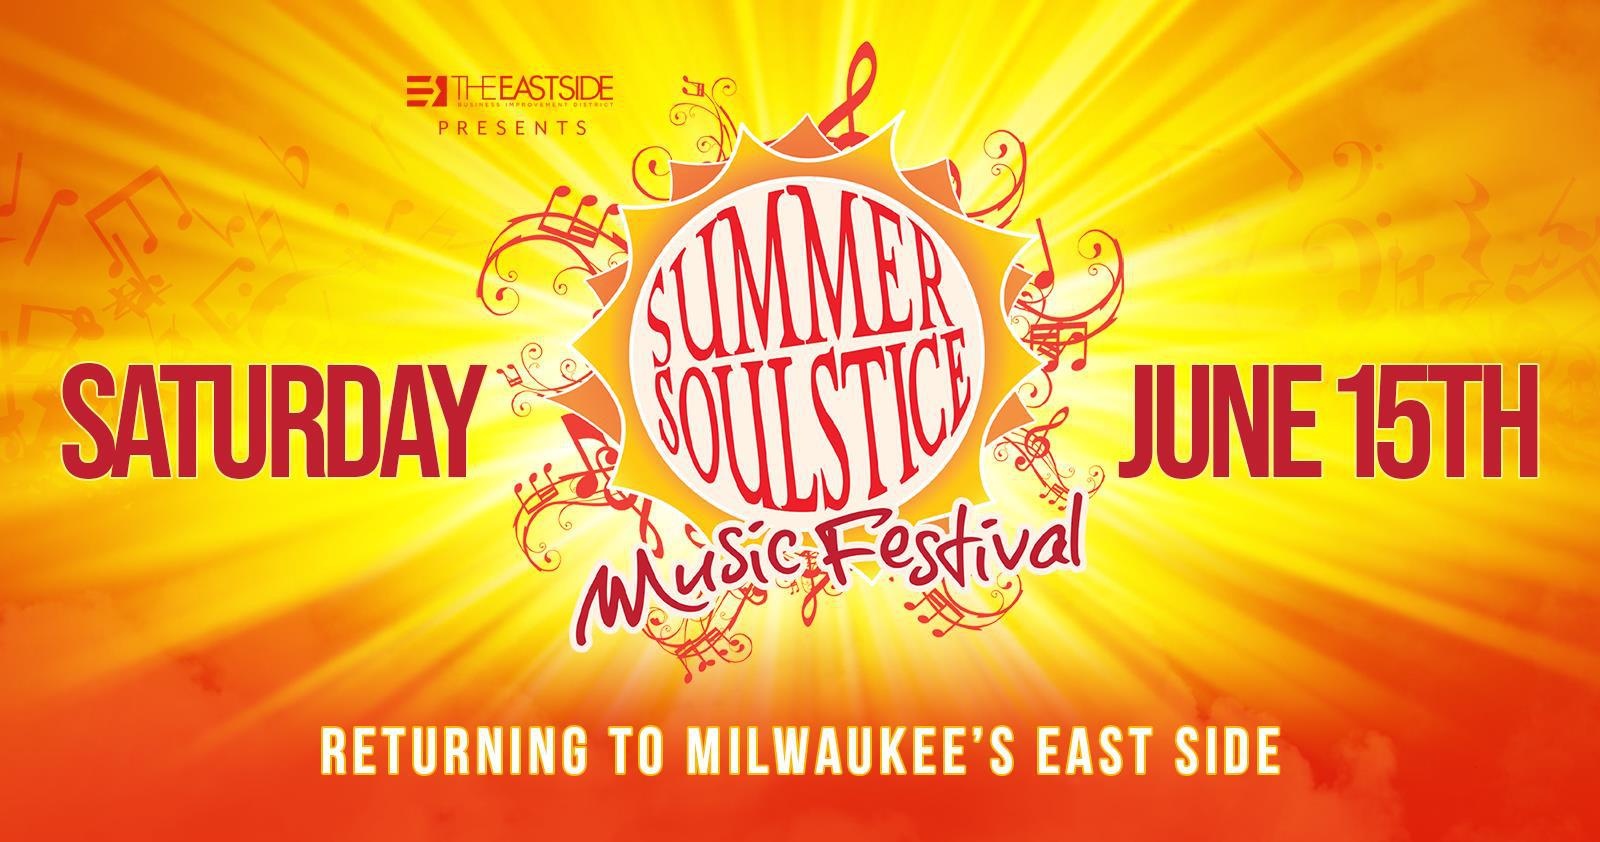 Summer Soulstice Music Festival Expands to Six Stages of Free Music